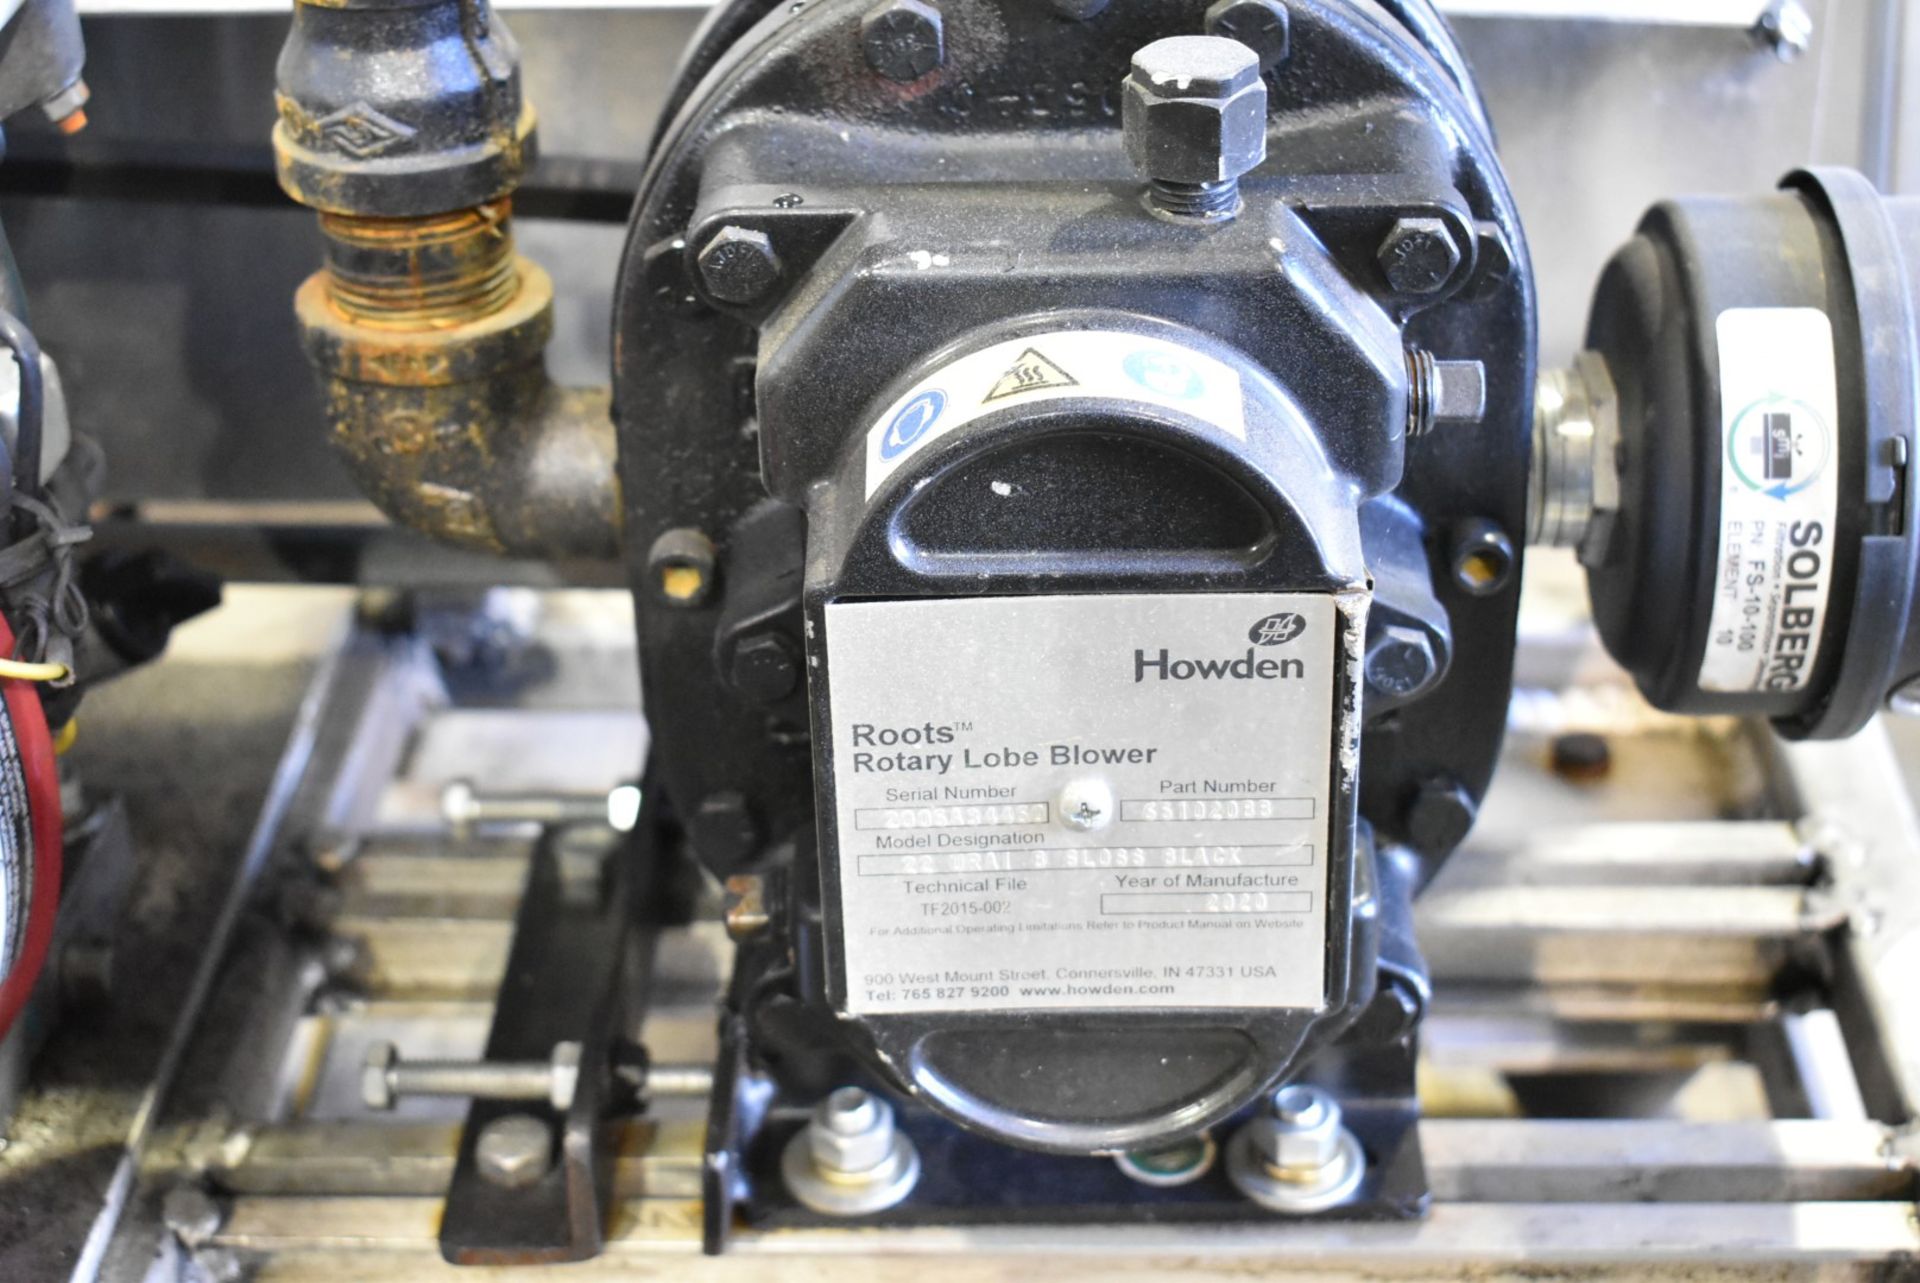 HOWDEN ROOTS ROTARY LOBE BLOWER WITH HONDA GX200 GAS ENGINE S/N: 200SA34450 - Image 2 of 3